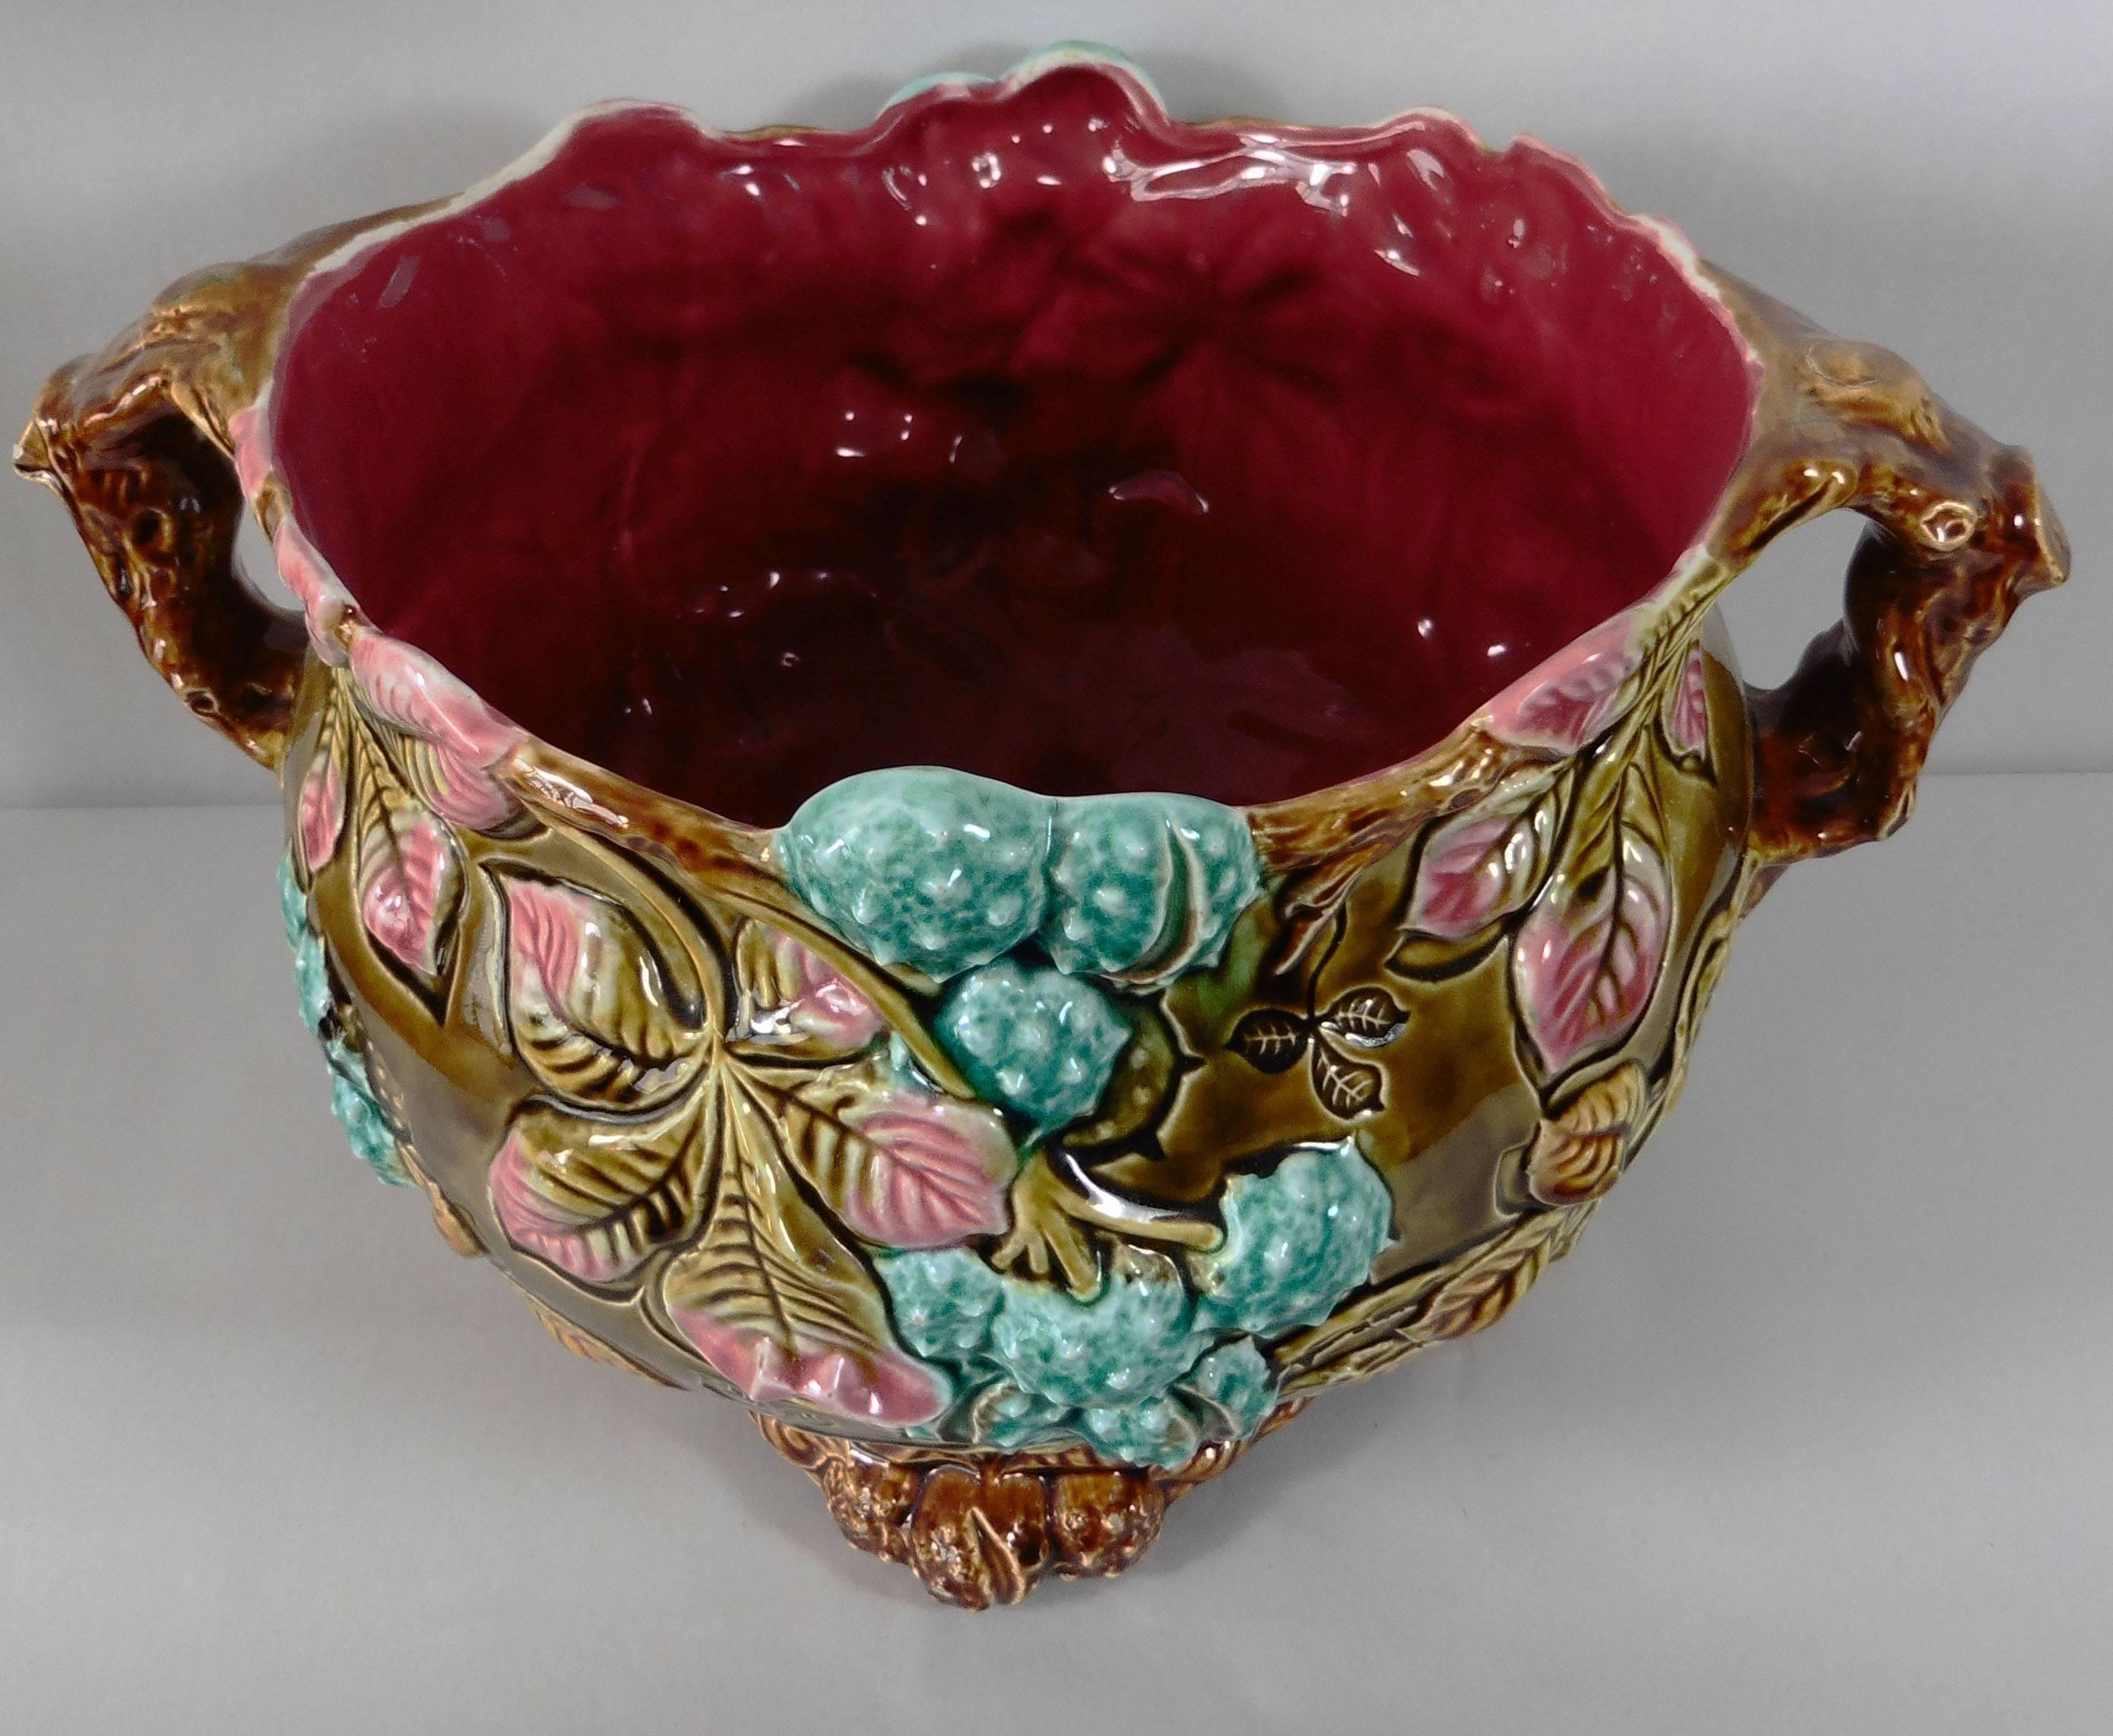 19th century Majolica chesnut handled jardinière signed Onnaing.
This jardinière is inspired by the Art Nouveau and the Naturalism movement of the end of 19th century.